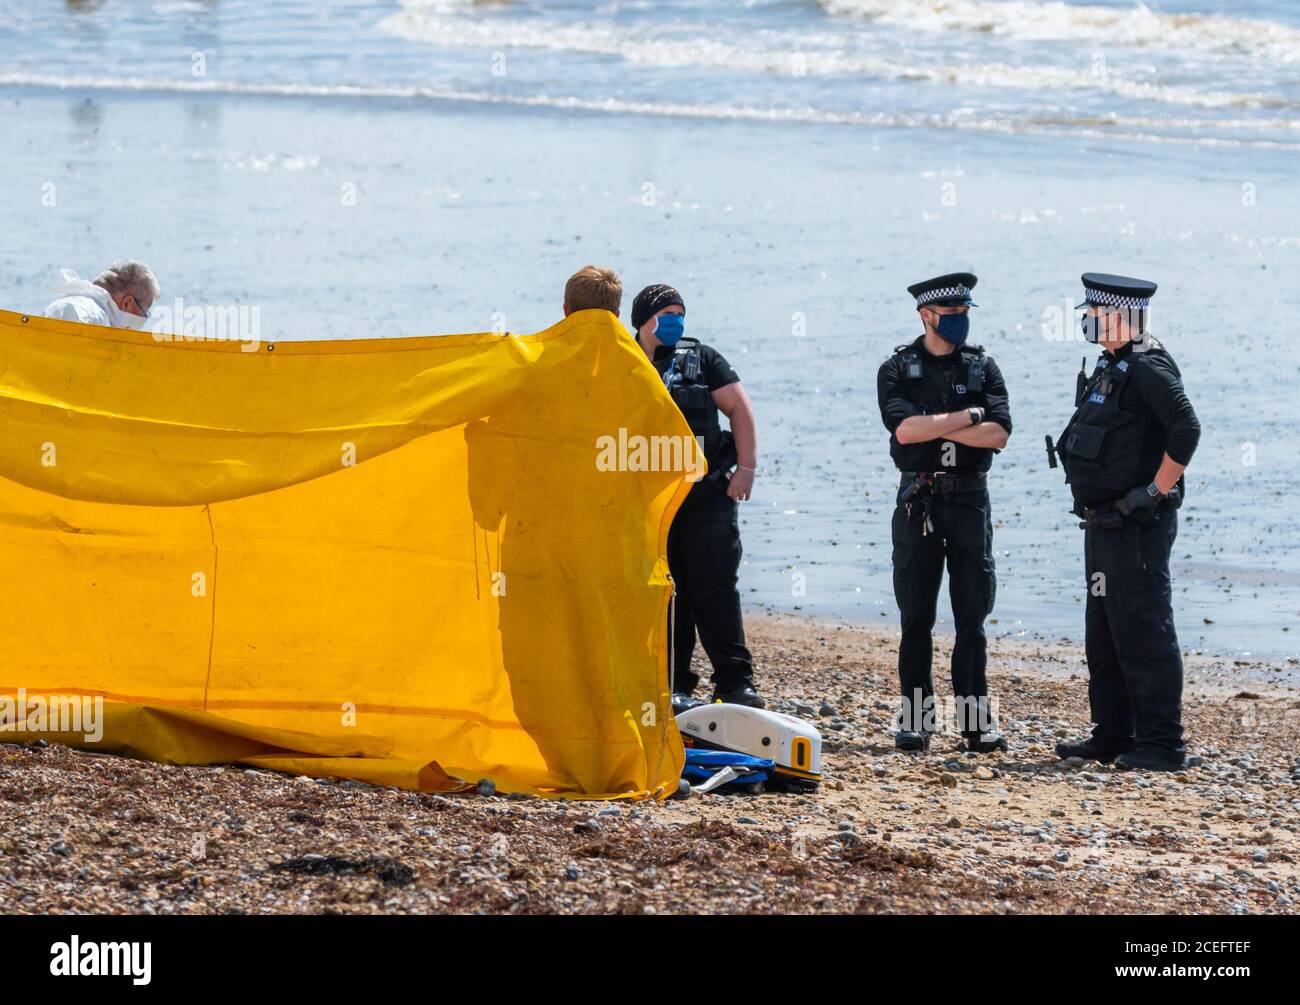 Police at an incident on a beach in England,UK, with a privacy screen up & officers wearing face masks due to the COVID19 Coronavirus pandemic. Stock Photo